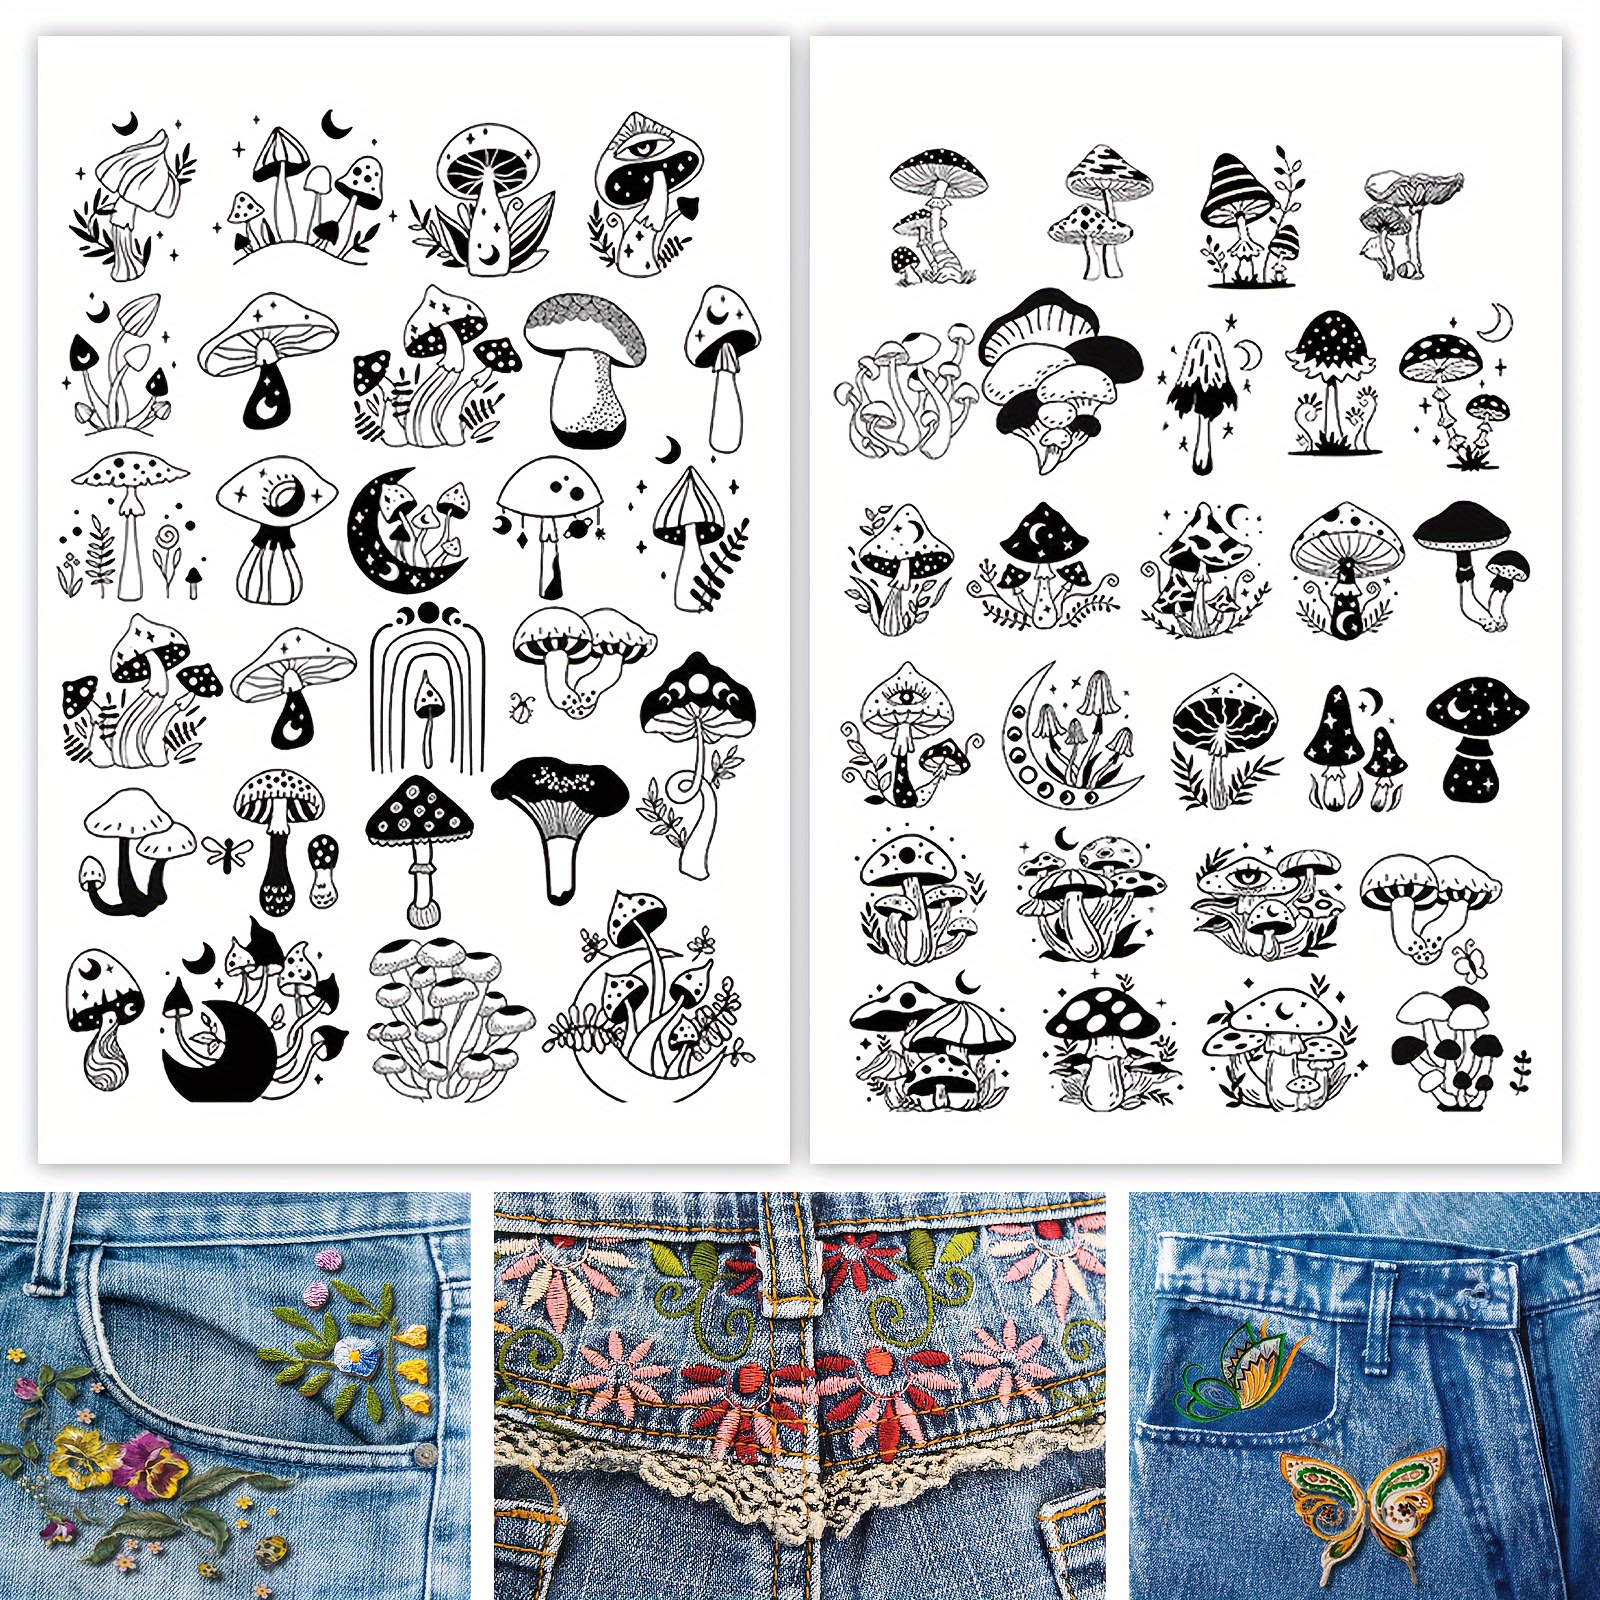 45Pcs Water Soluble Embroidery Stabilizers, Stick and Stitch Embroidery  Designs Paper, Embroidery Transfer Paper Pre-Printed Mushroom Patterns for